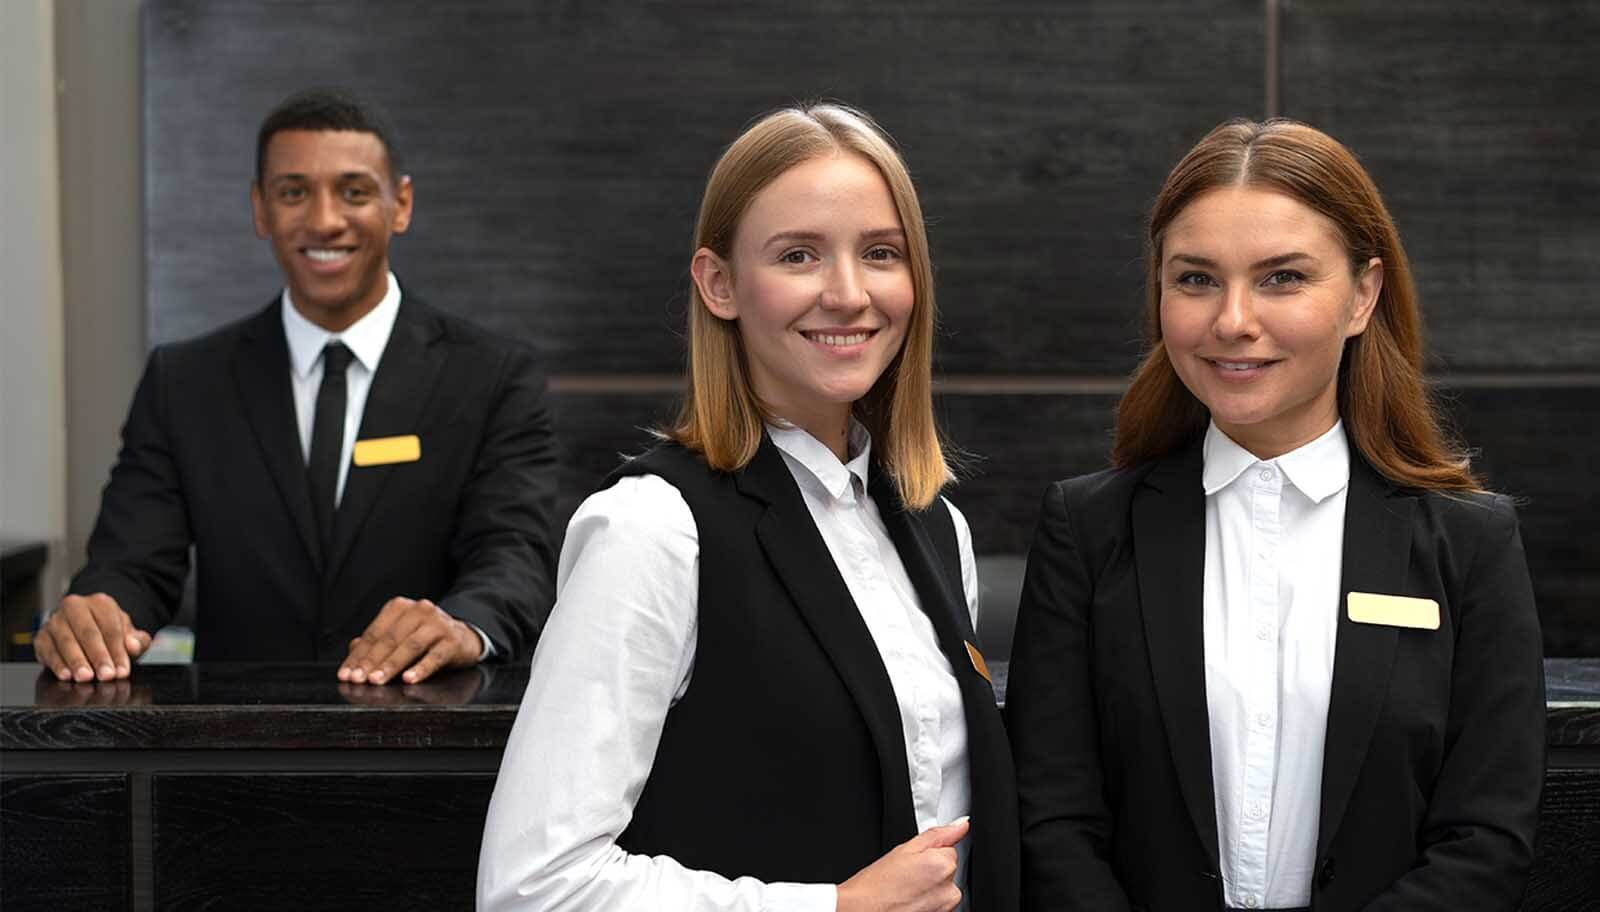 hotel front office job